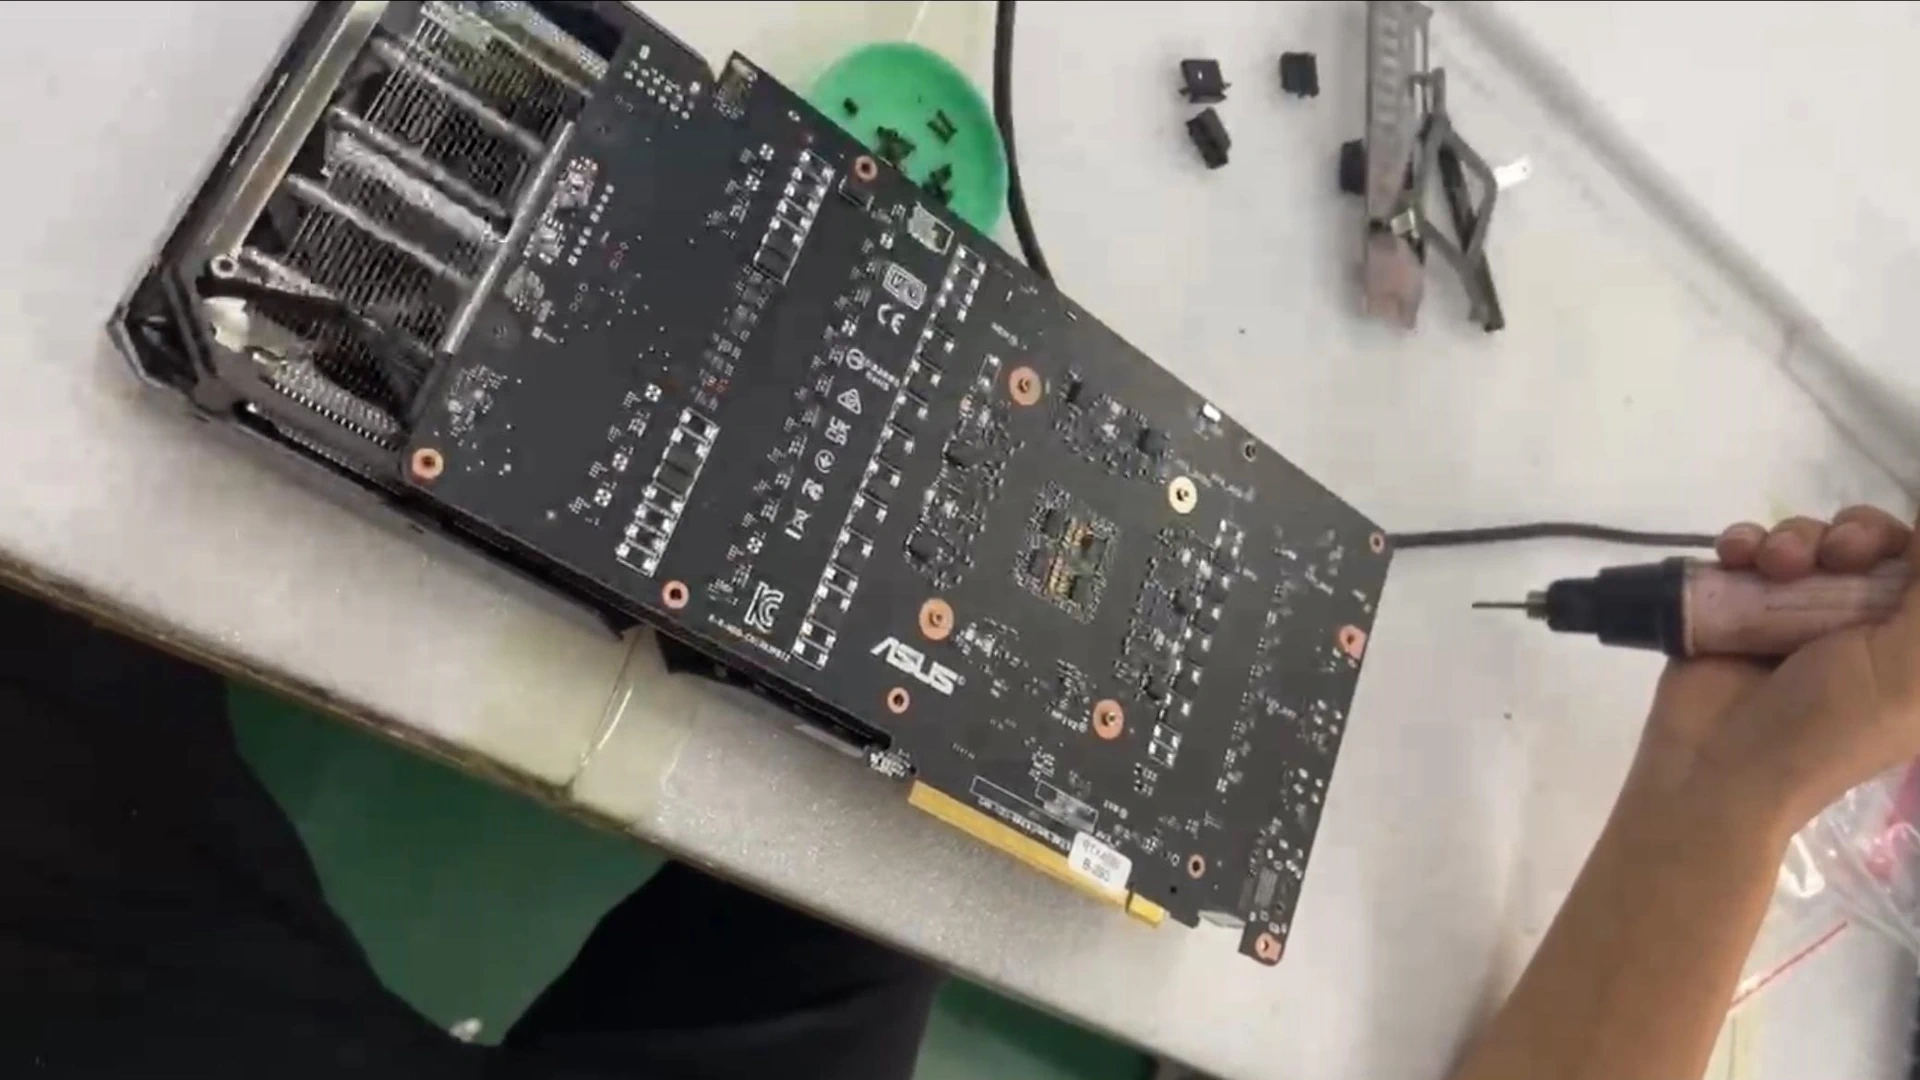 China’s metamorphosis of gaming into AI: factories dismantle Nvidia graphics cards and turn them into their own AI solutions